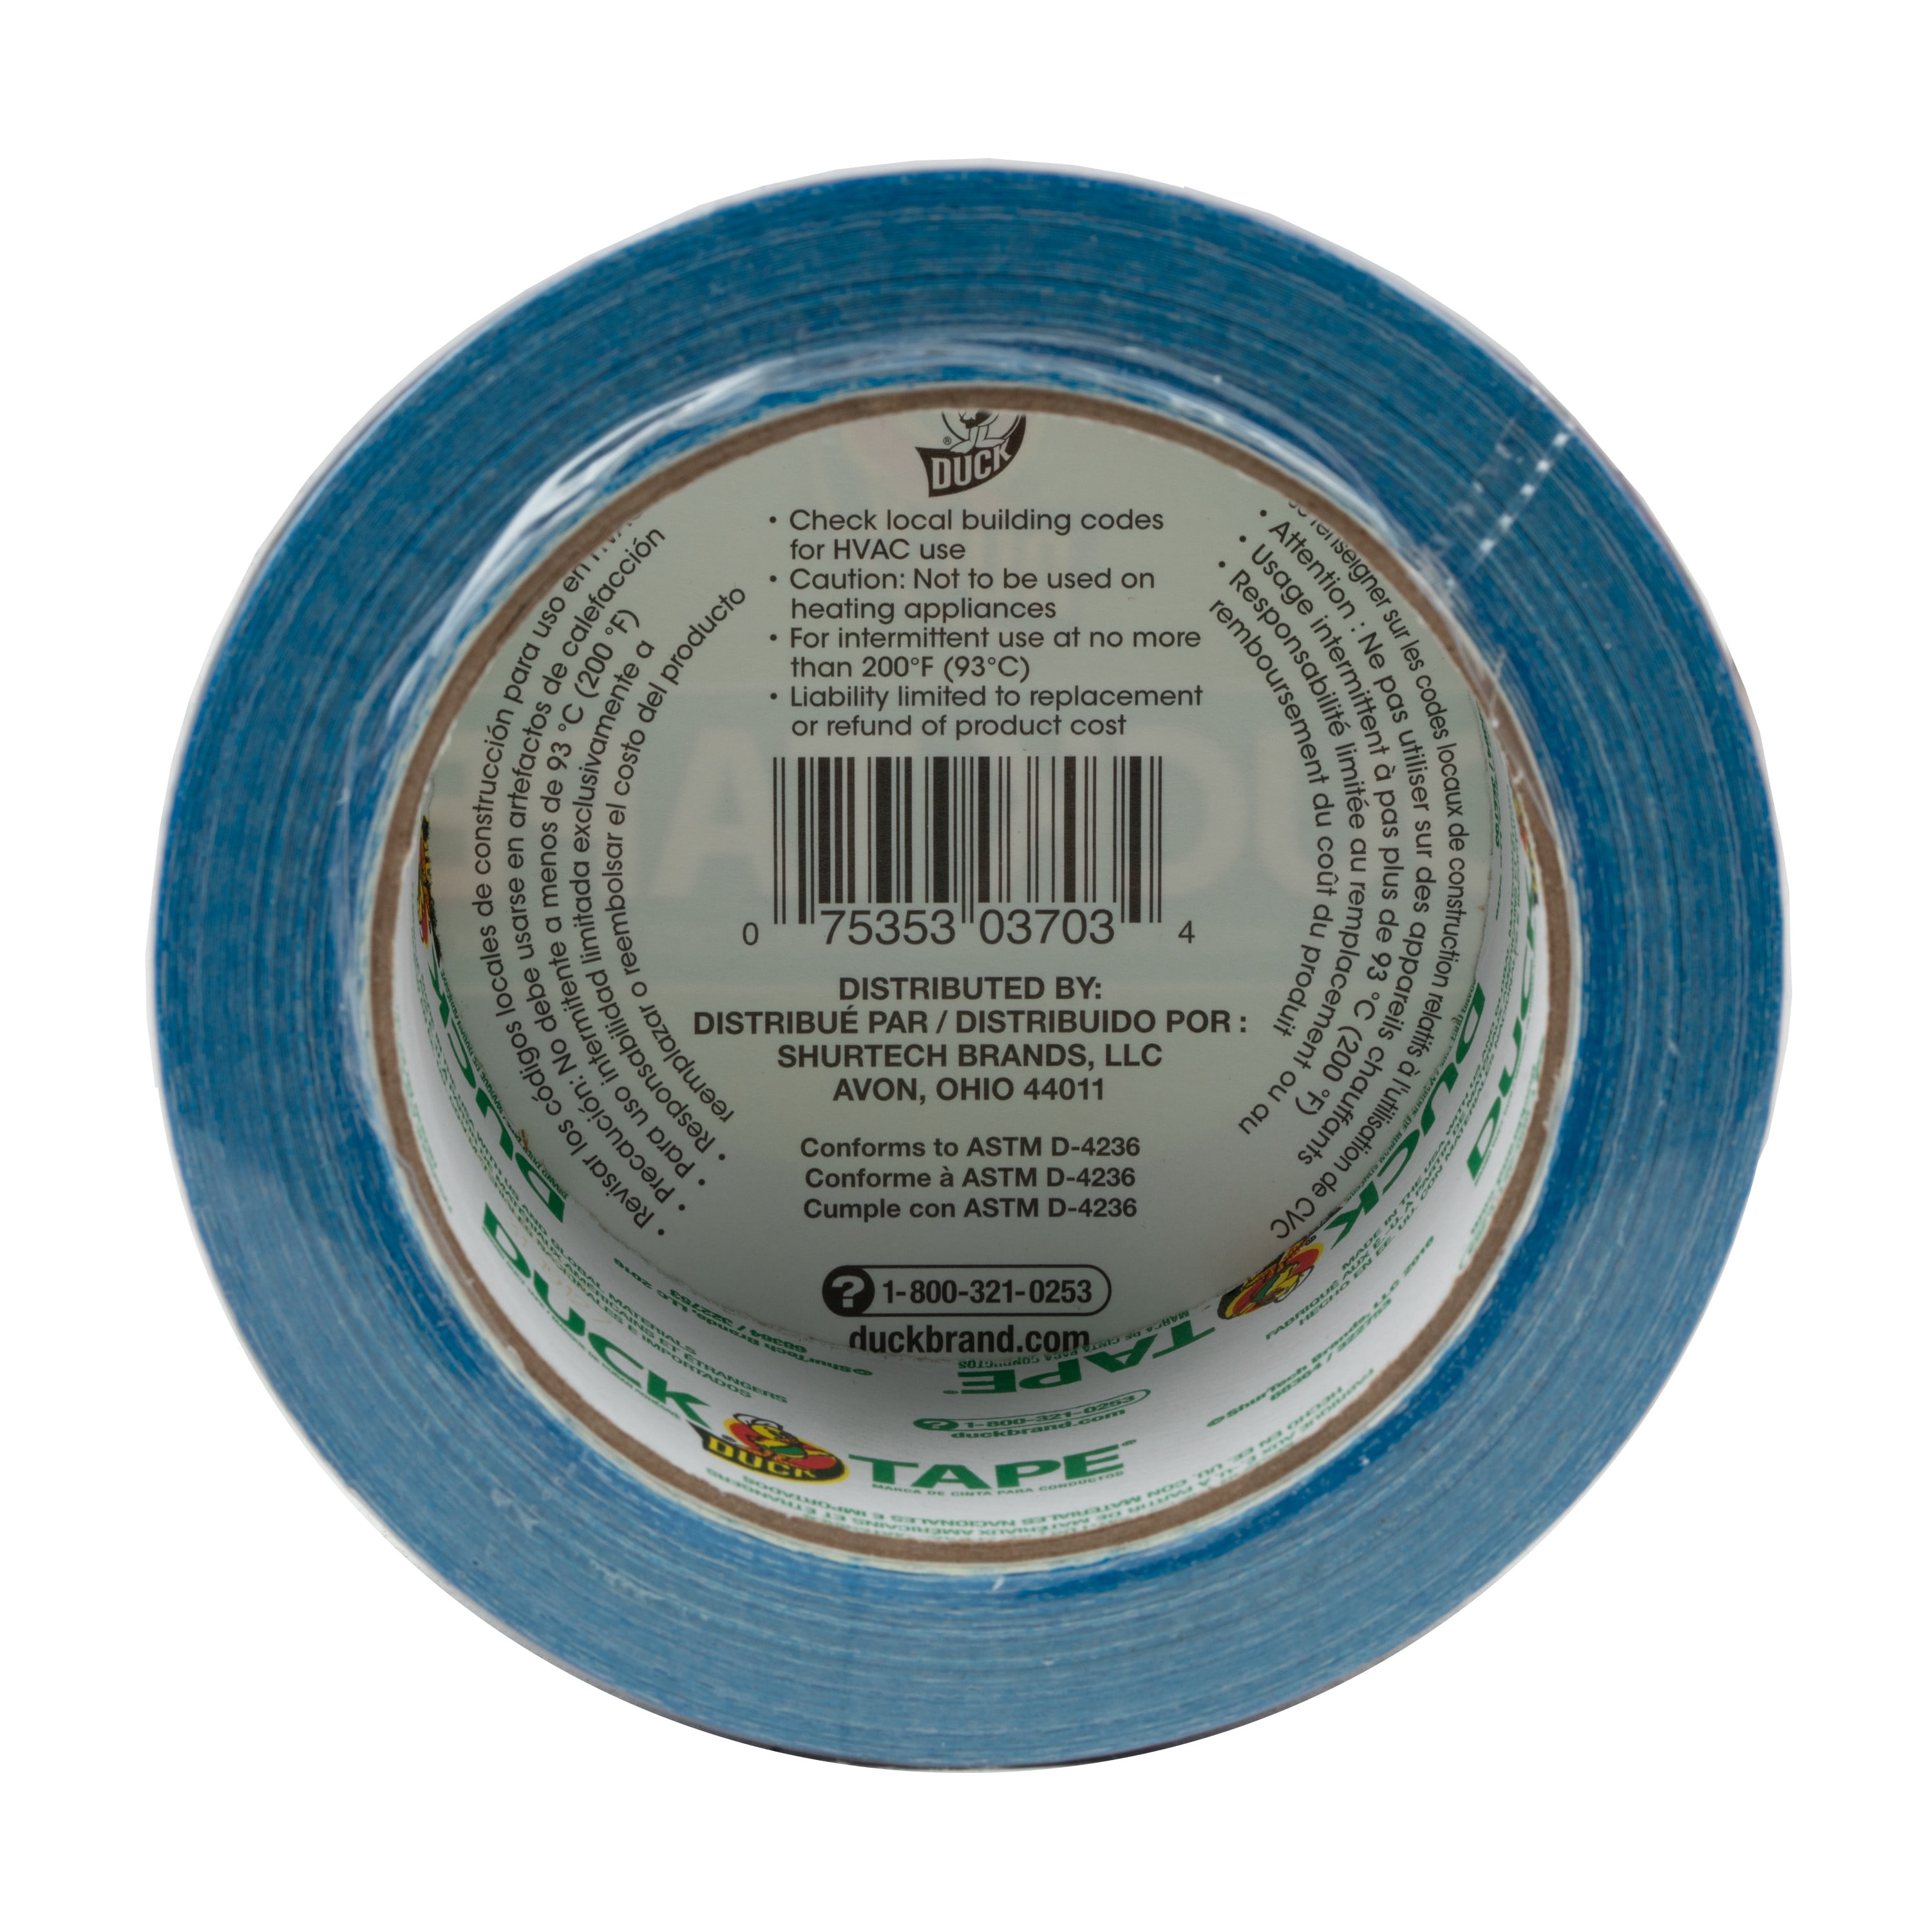 1.88 Inches x 20 Yards Duck Brand 1304959 Color Duct Tape Blue Single Roll 